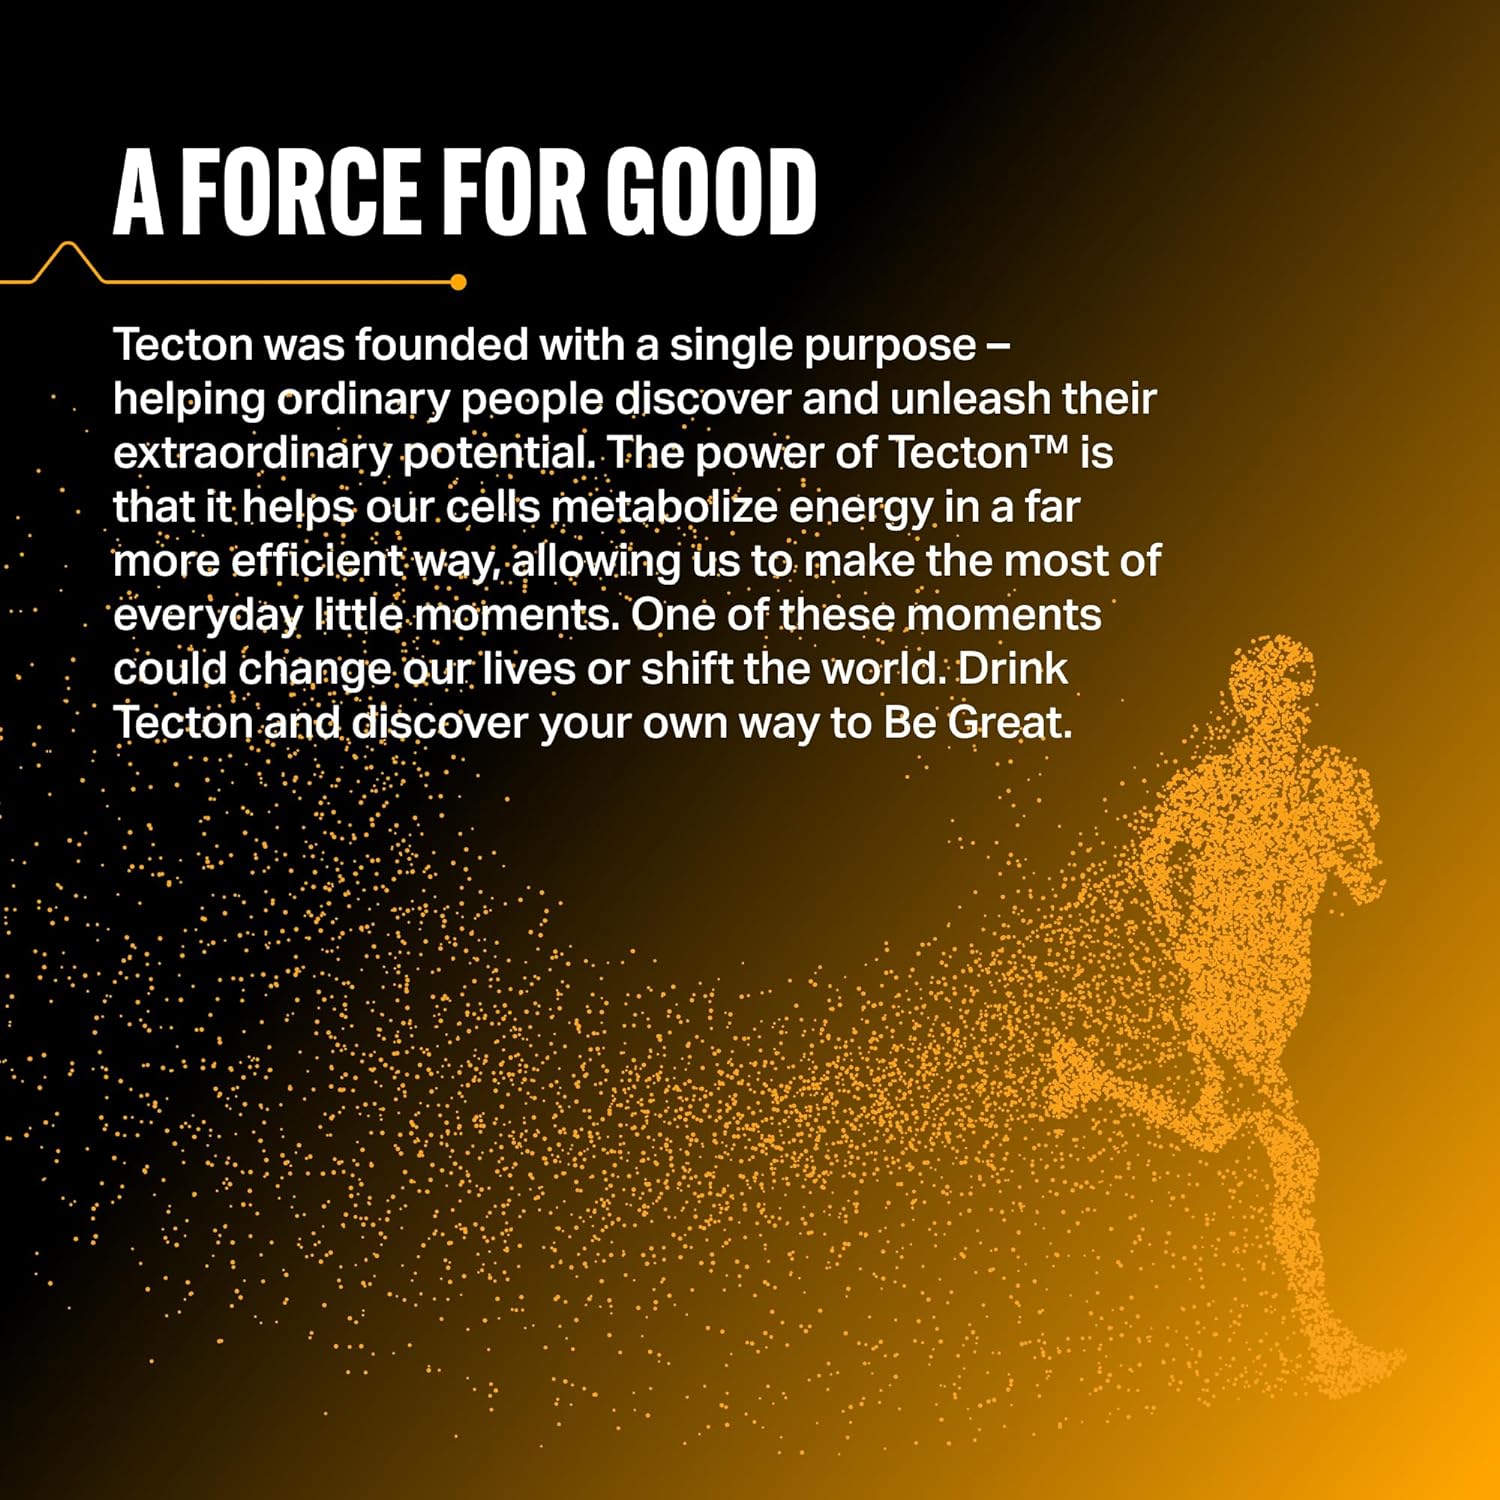 Tecton: A Force for Good